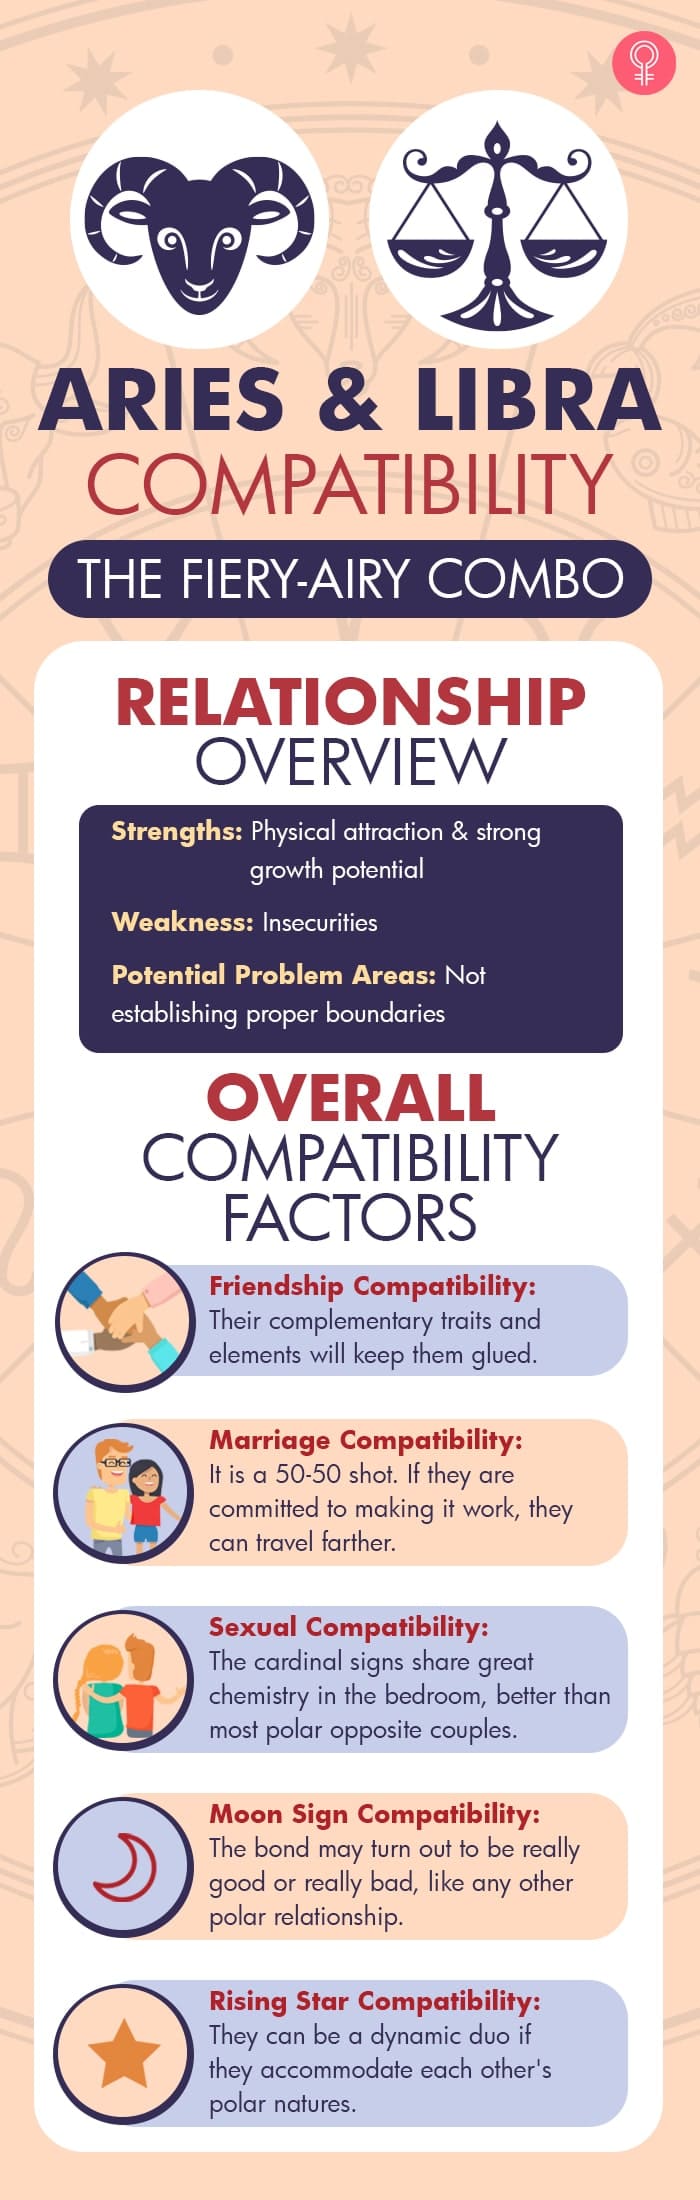 aries and libra compatibility (infographic)